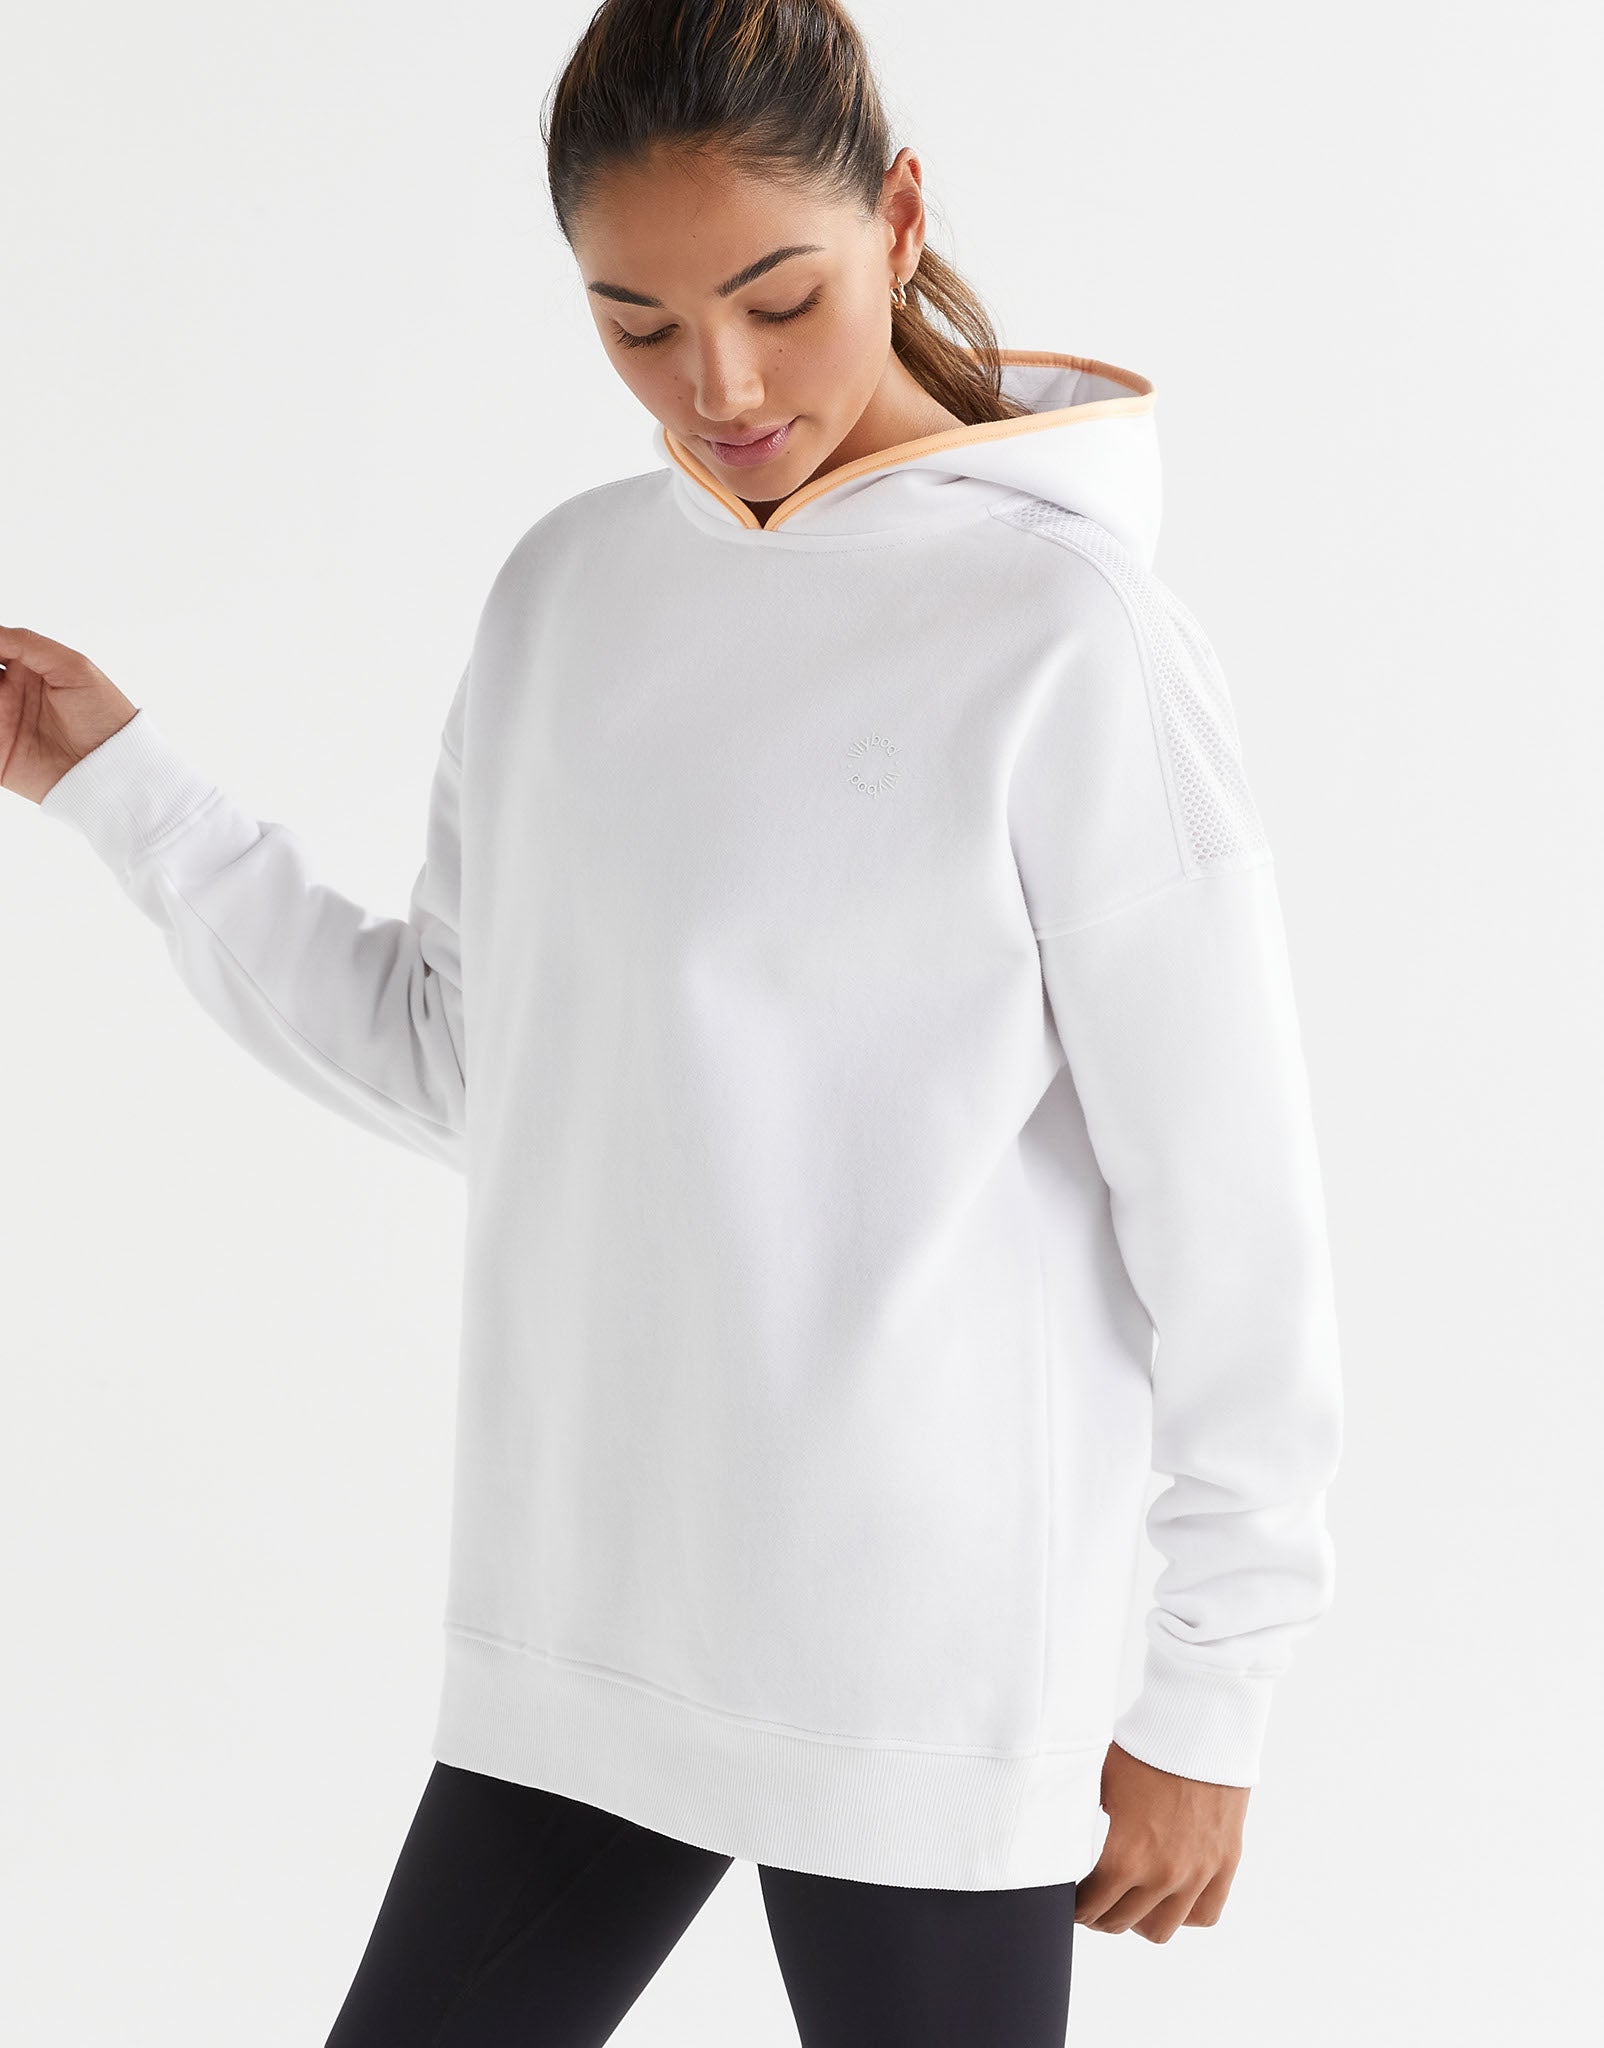 Lilybod-Lucy-Hooded-Sweat-White-LT68-C22-WT-3.jpeg